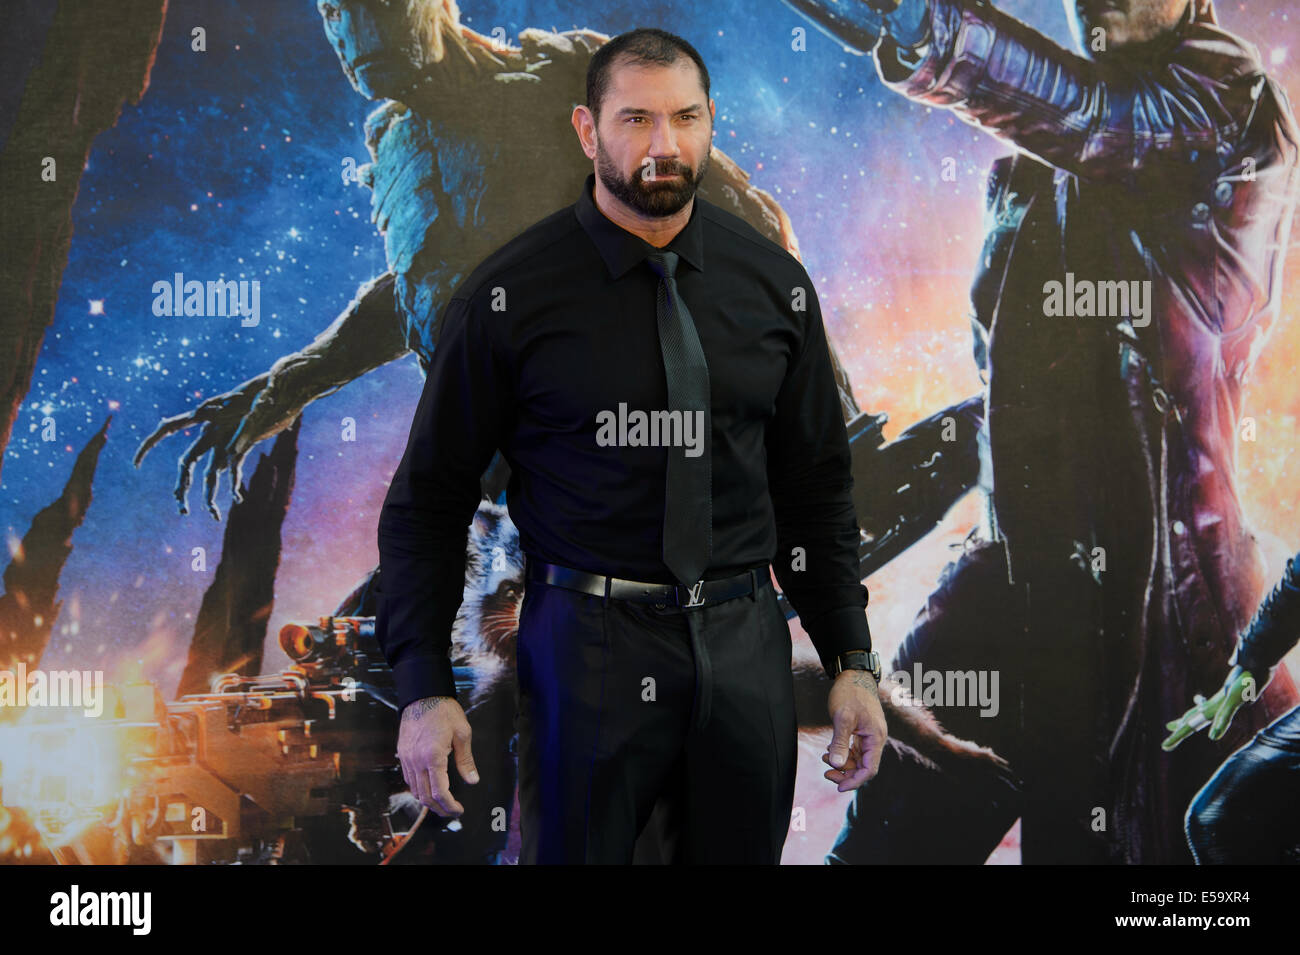 IRON HEAD FITz - Bautista at the Guardians of the Galaxy premiere in July  2014. Born David Michael Bautista Jr. January 18, 1969 (age 46)[1]  Washington, D.C., United States[2] Occupation Professional wrestler